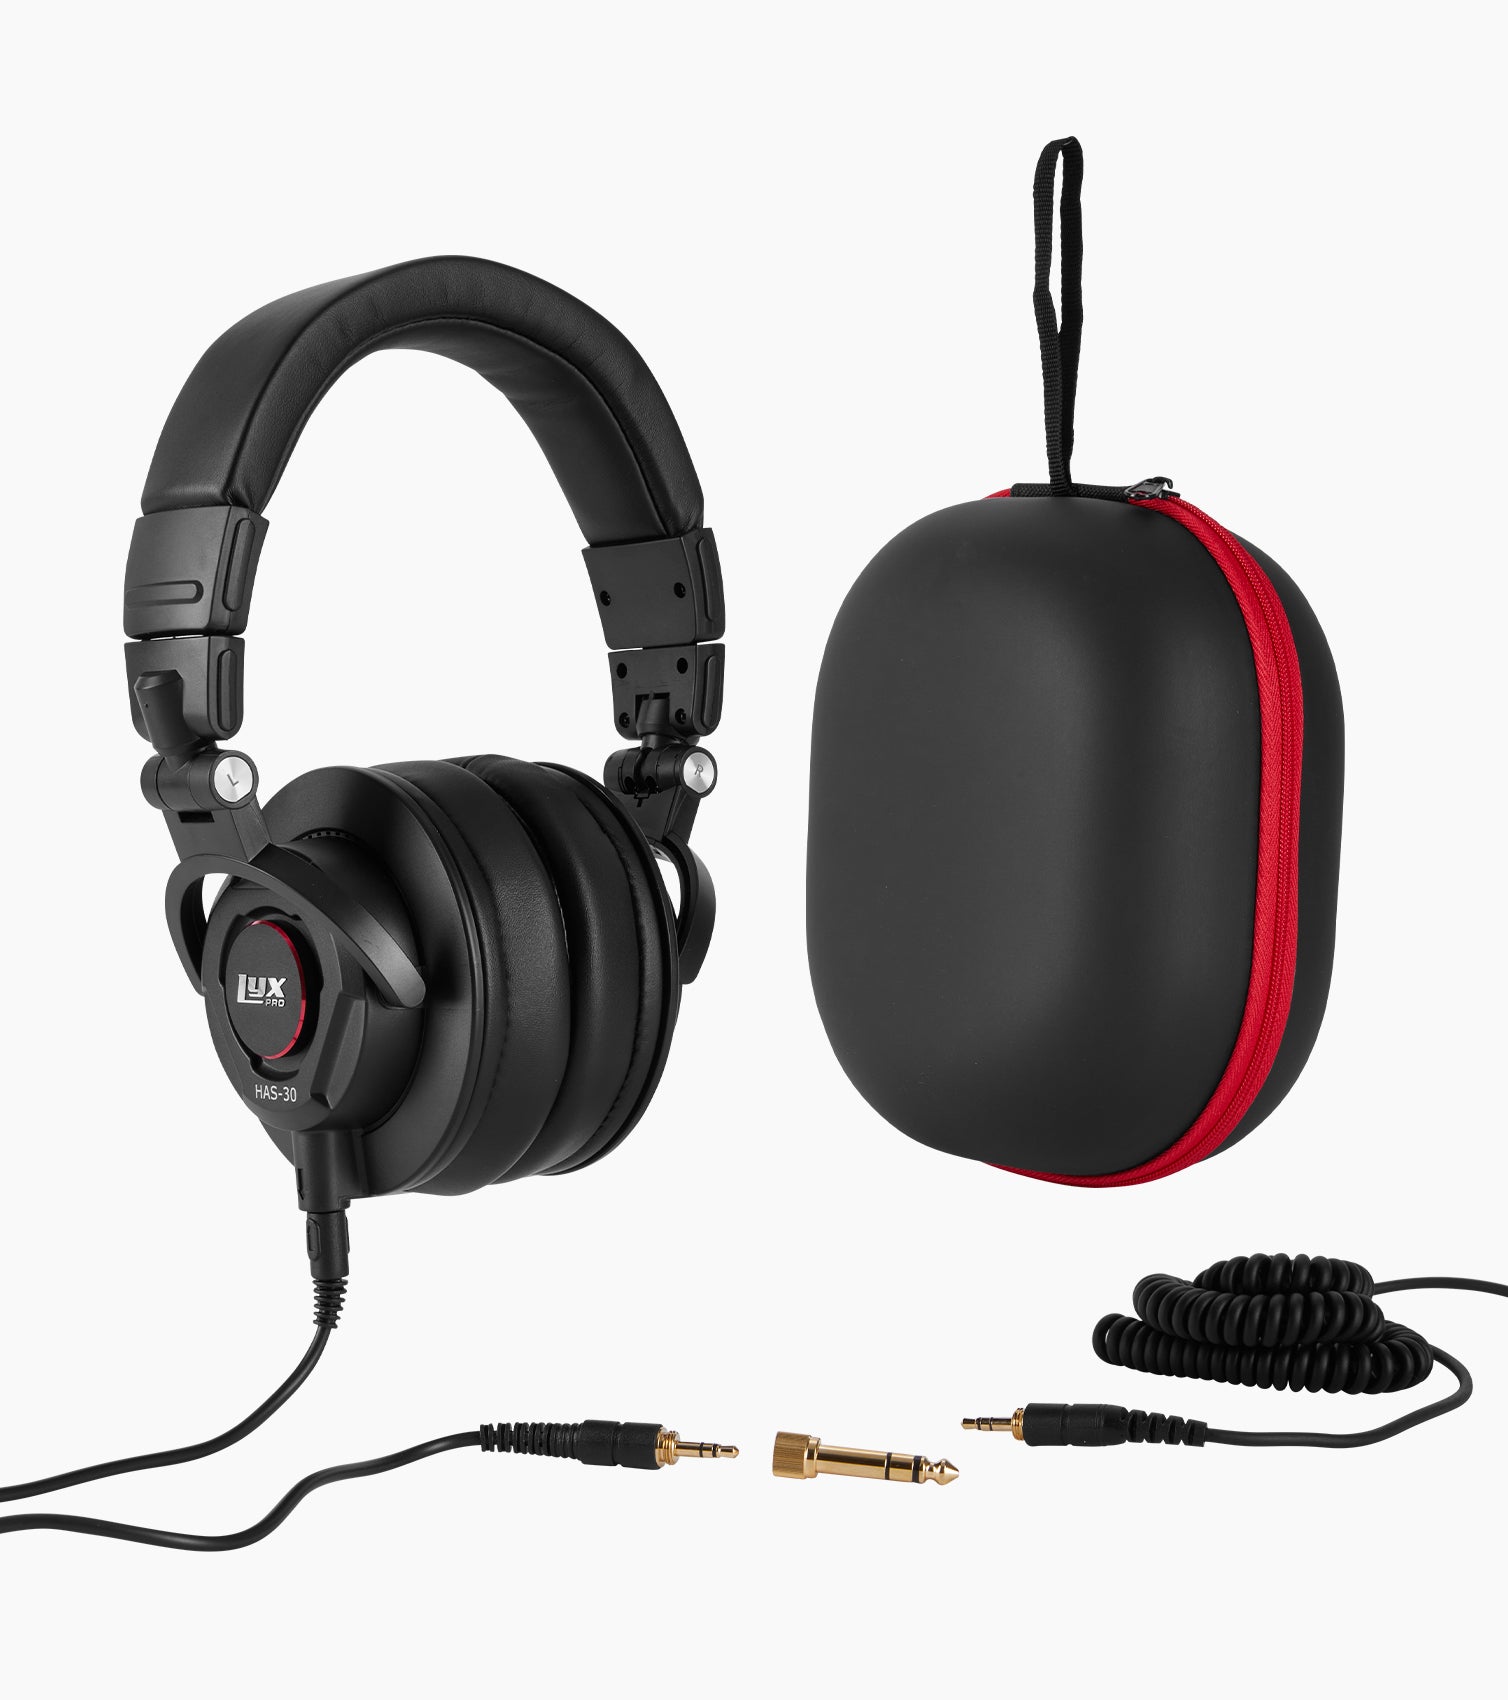 sound-isolating headphones alongside cable and carrying case